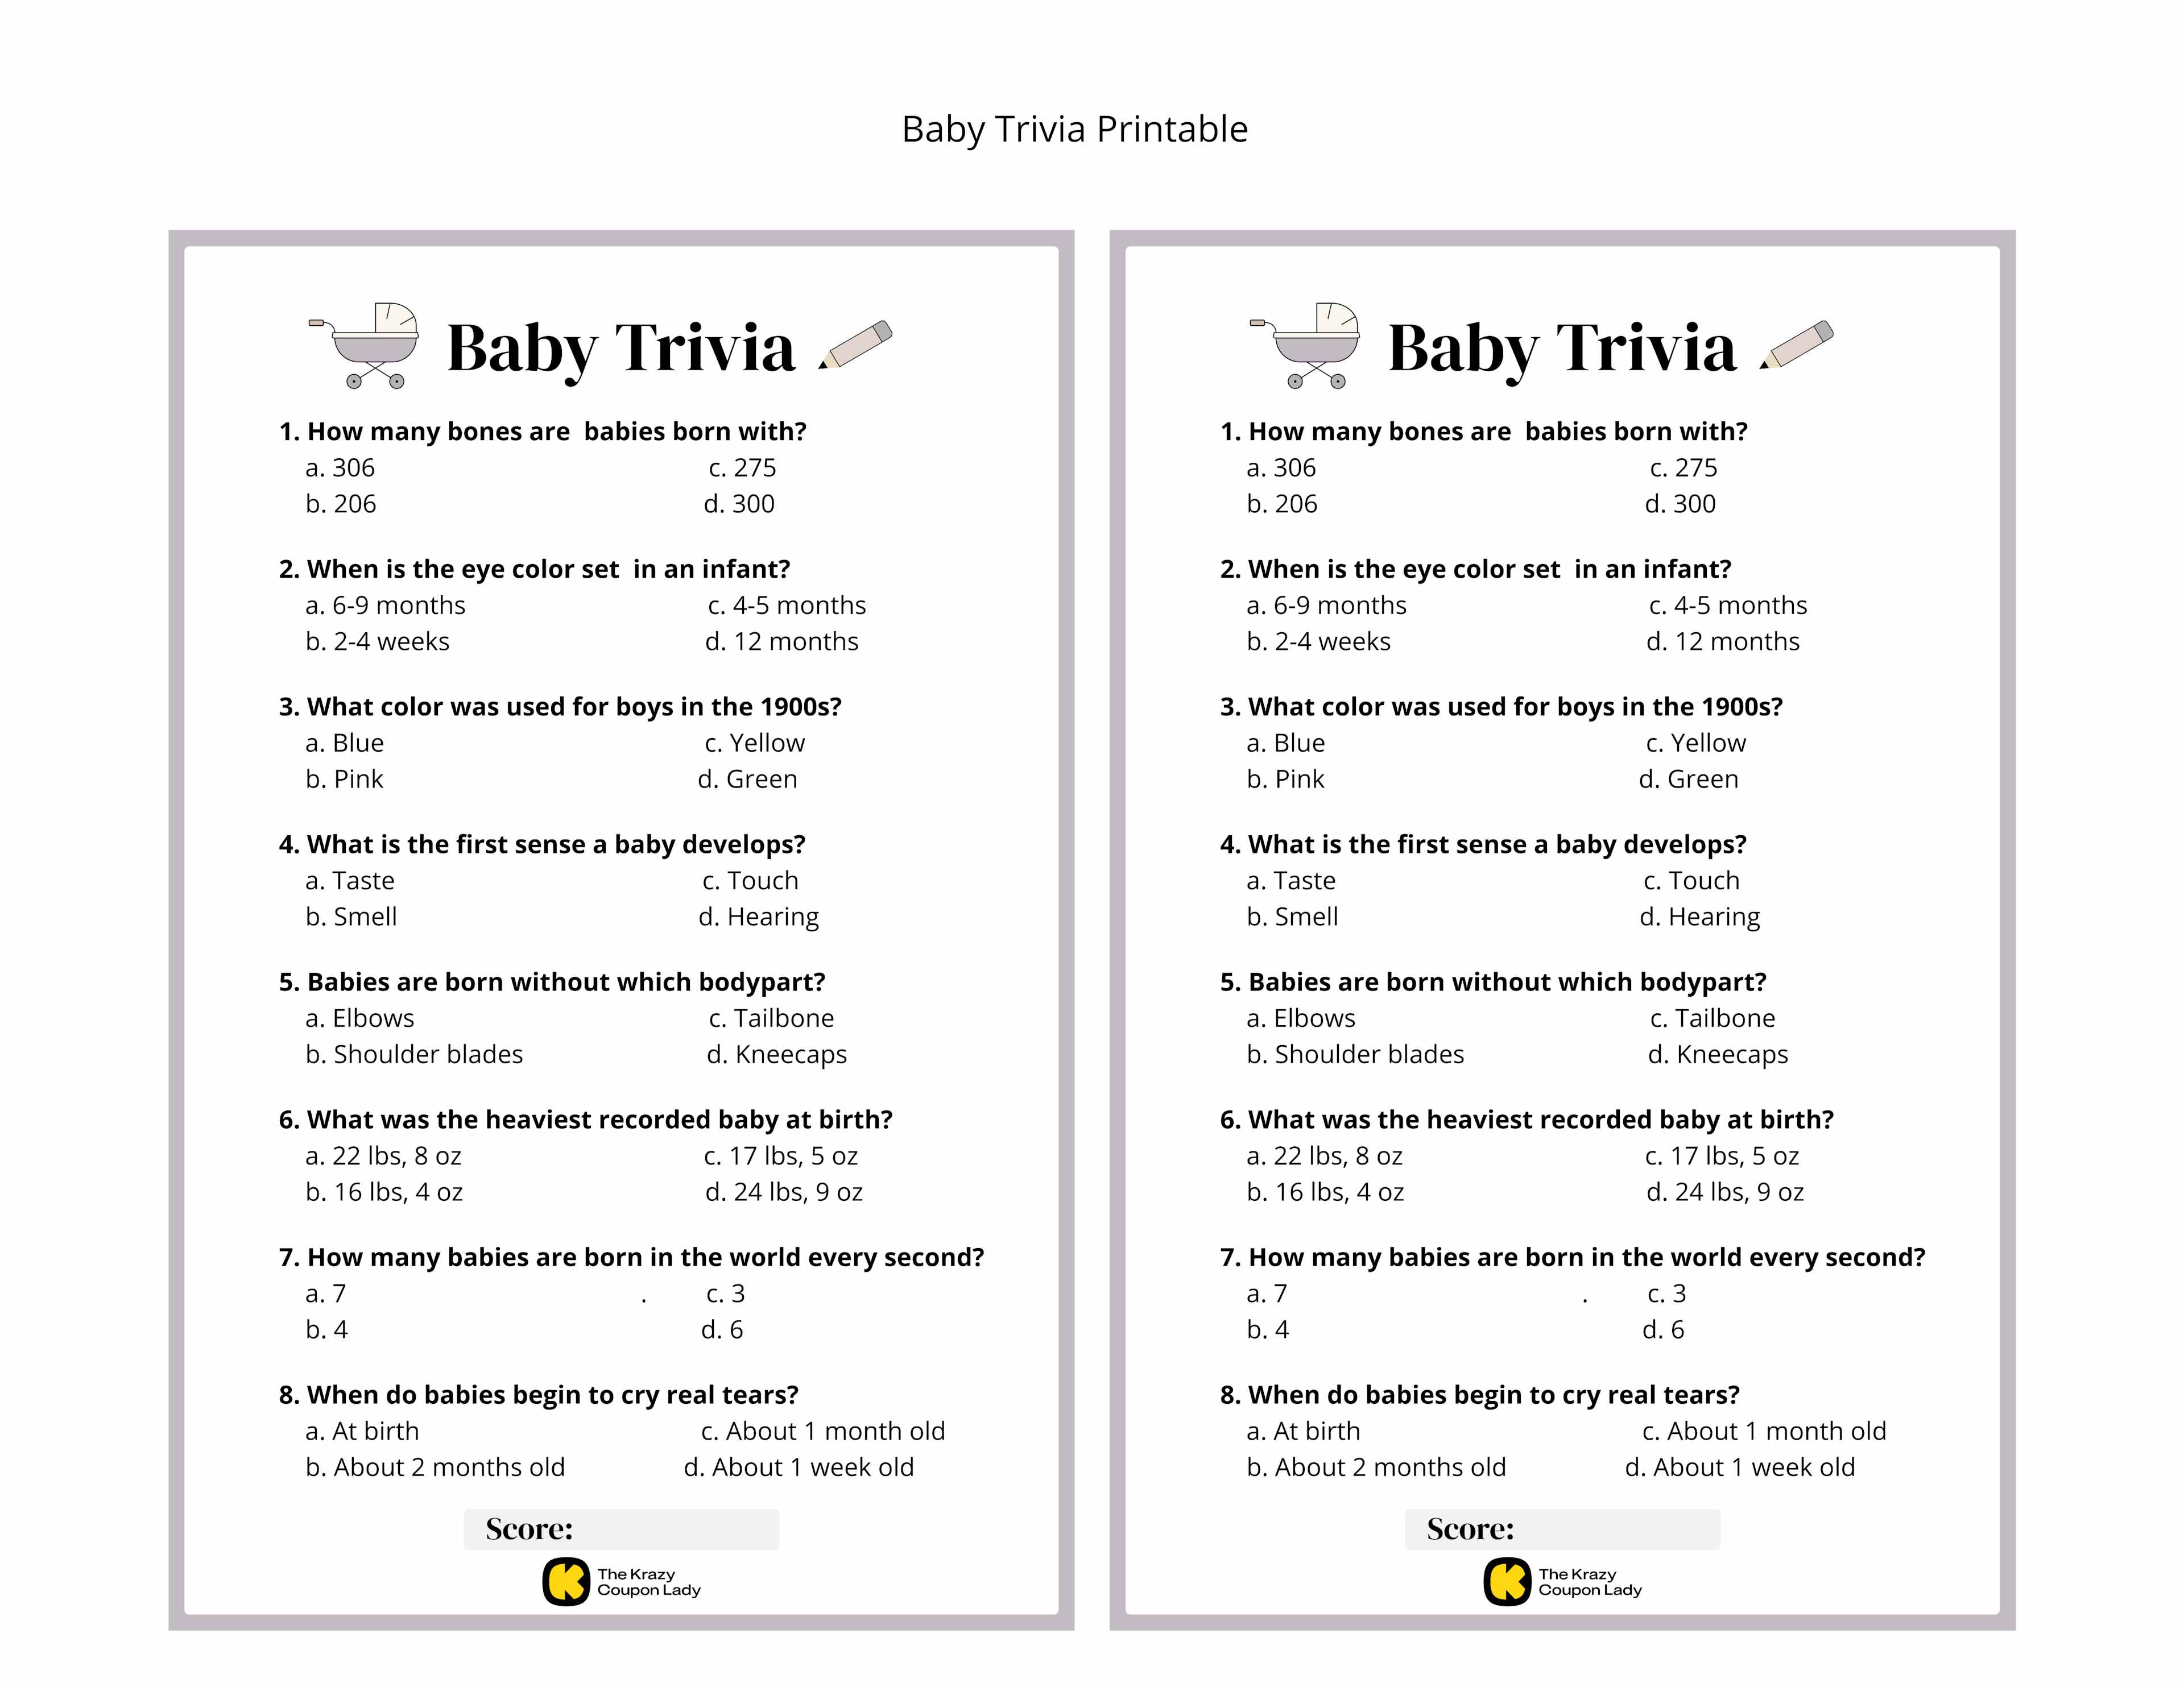 Baby Trivia game for baby shower